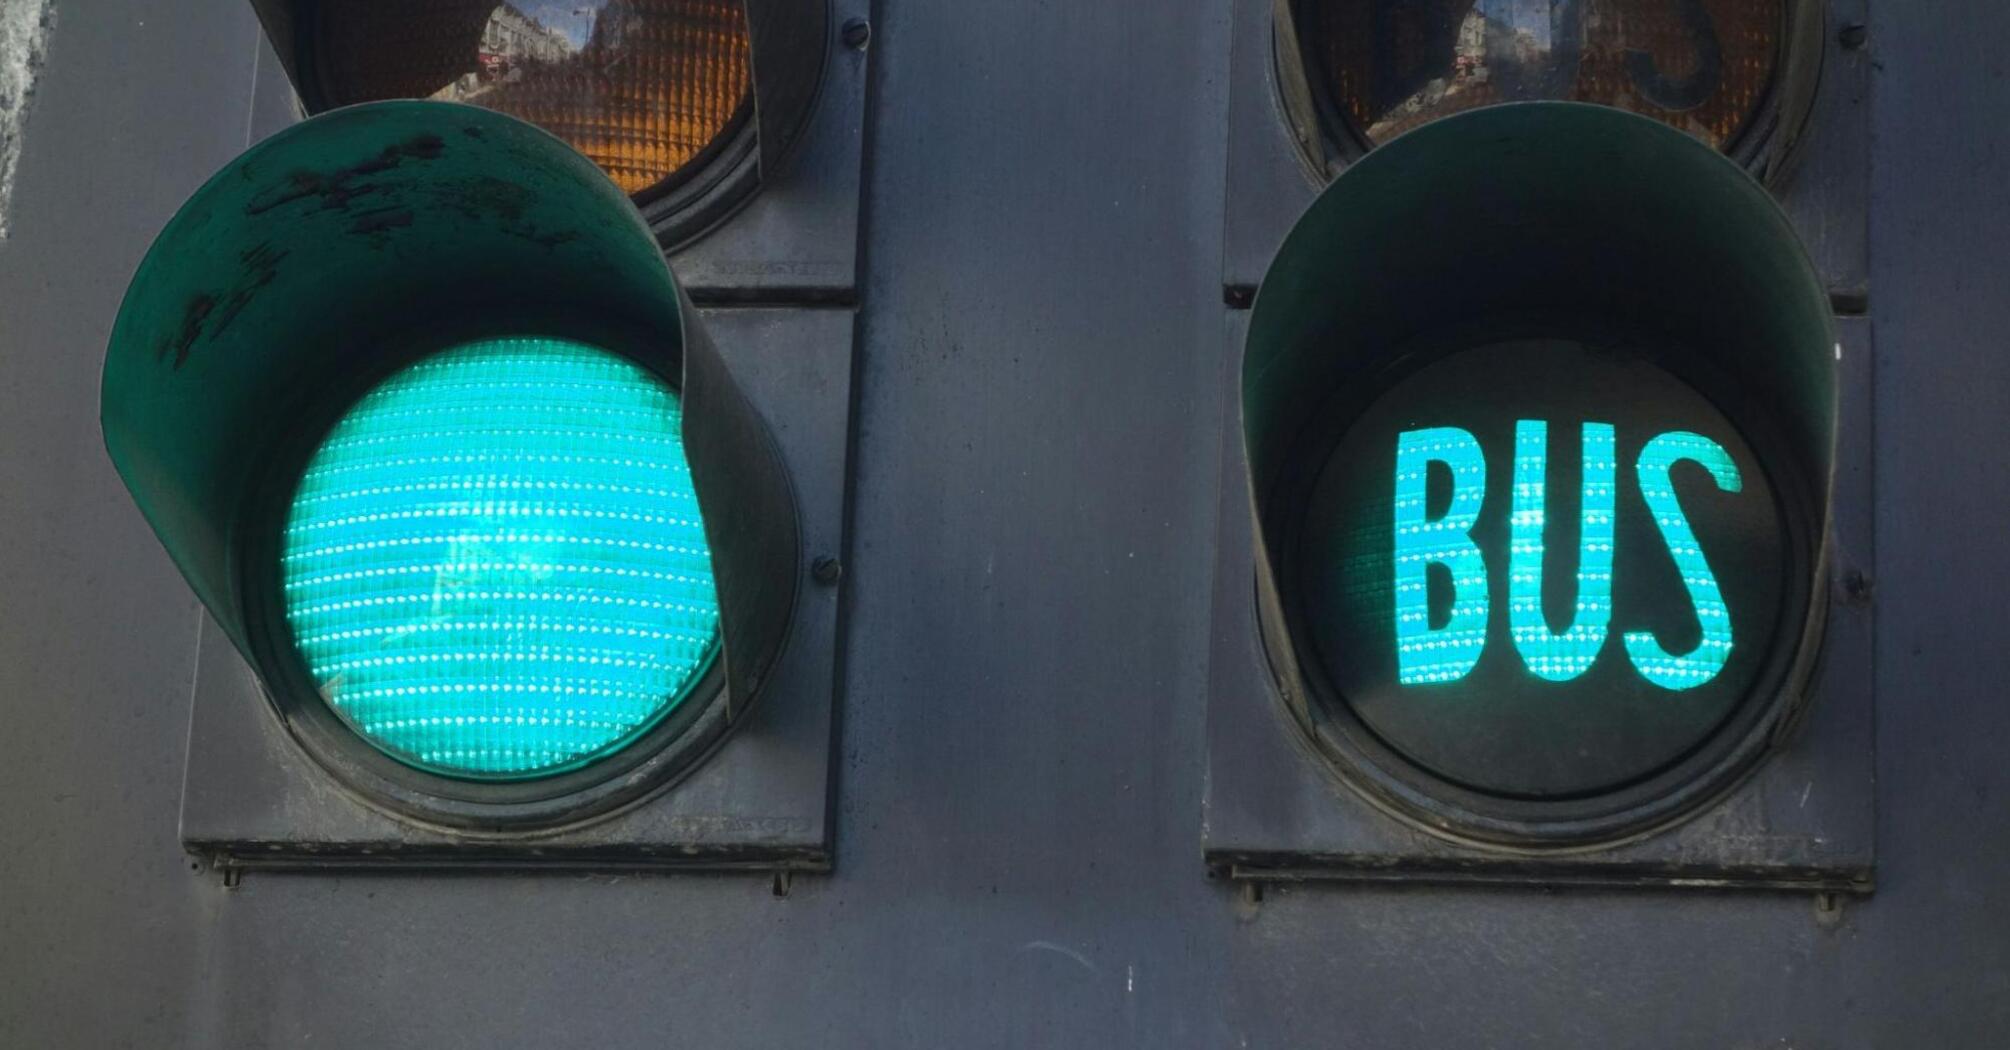 Traffic light with a green signal and a bus signal